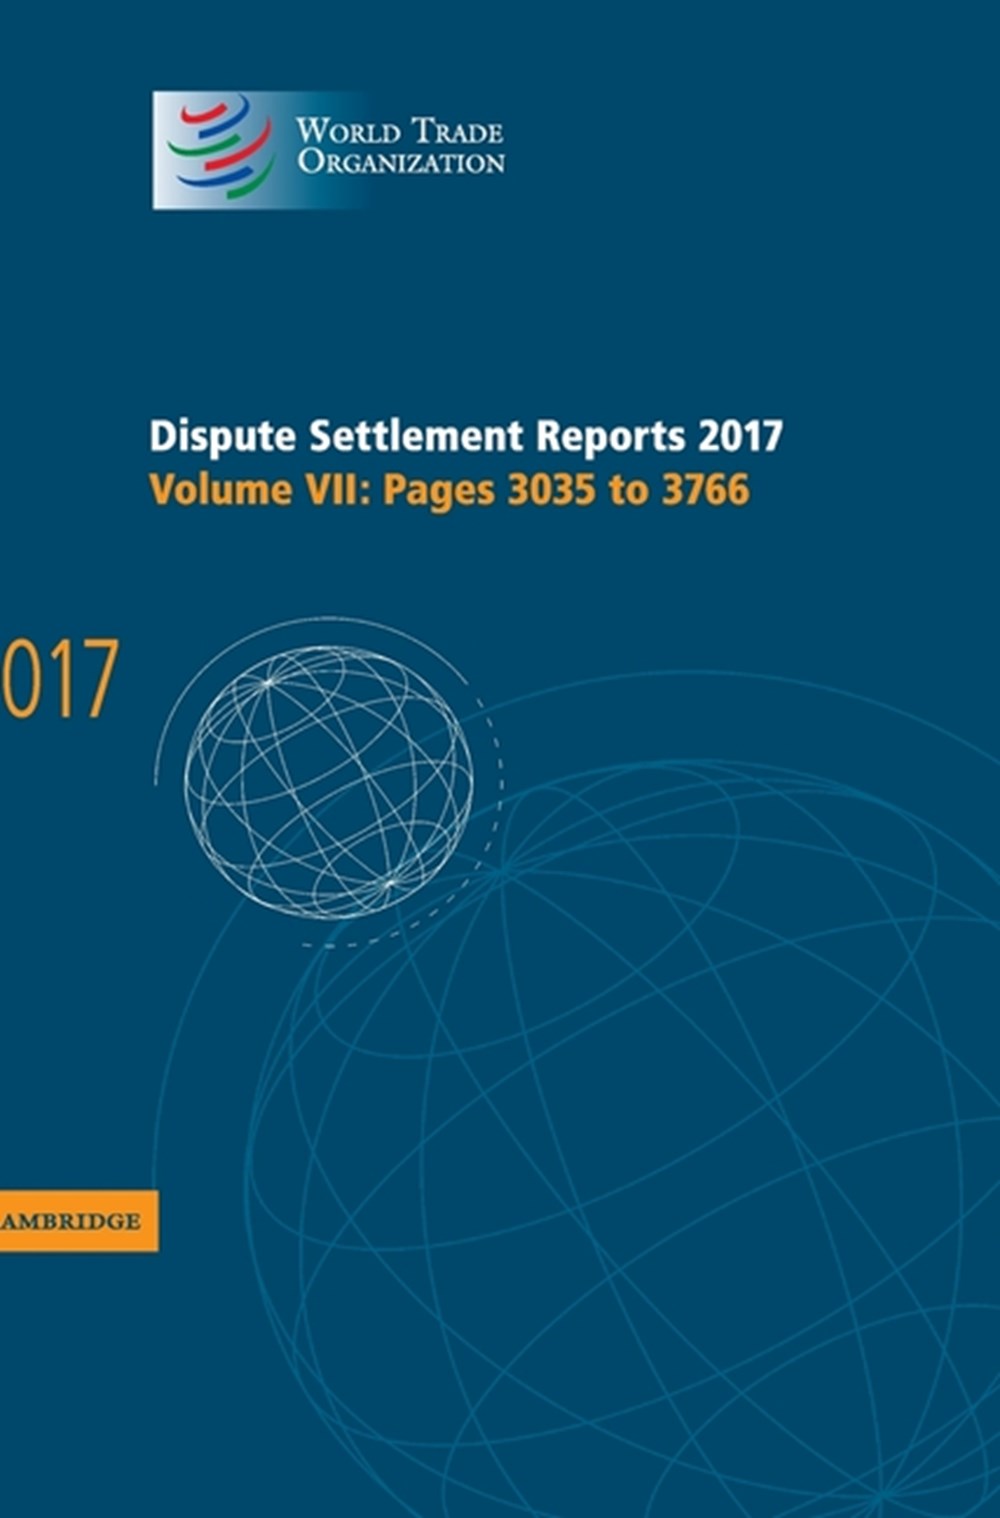 Dispute Settlement Reports 2017 Volume 7, Pages 3035 to 3766